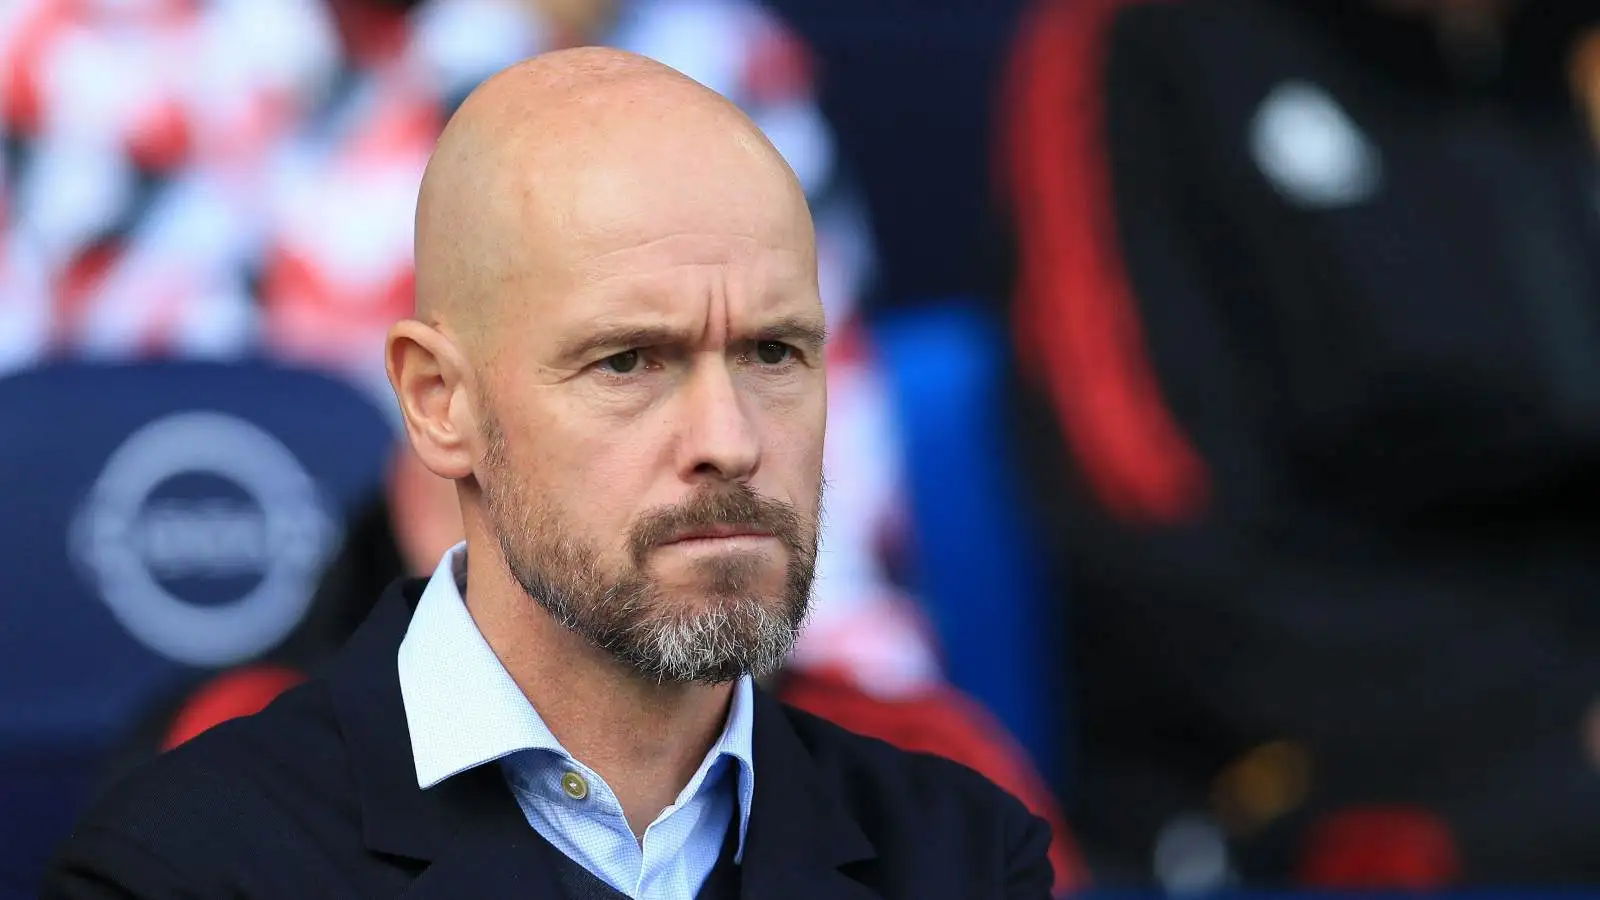 Man Utd boss Ten Hag to hold talks with Rashford amid poor form; second problem player singled out